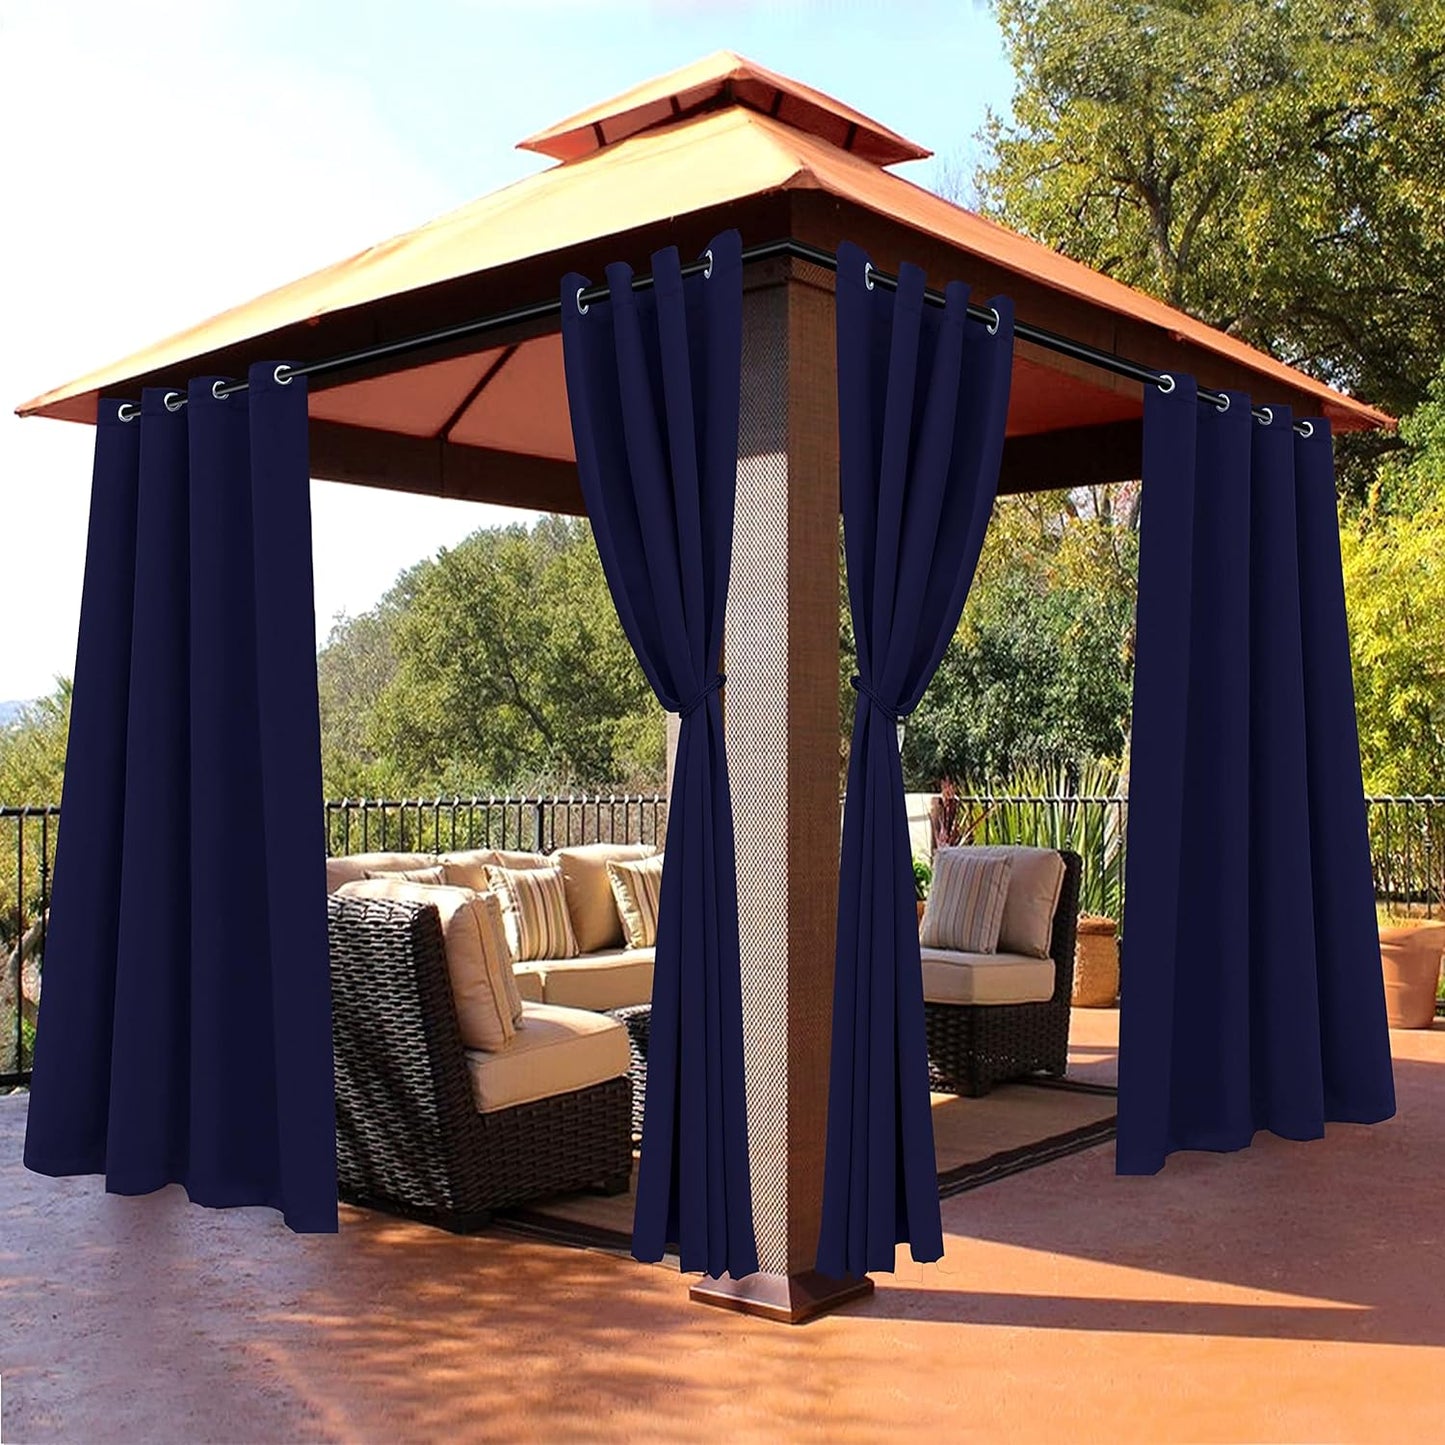 BONZER Outdoor Curtains for Patio Waterproof - Light Blocking Weather Resistant Privacy Grommet Blackout Curtains for Gazebo, Porch, Pergola, Cabana, Deck, Sunroom, 1 Panel, 52W X 84L Inch, Silver  BONZER Navy 52W X 108 Inch 